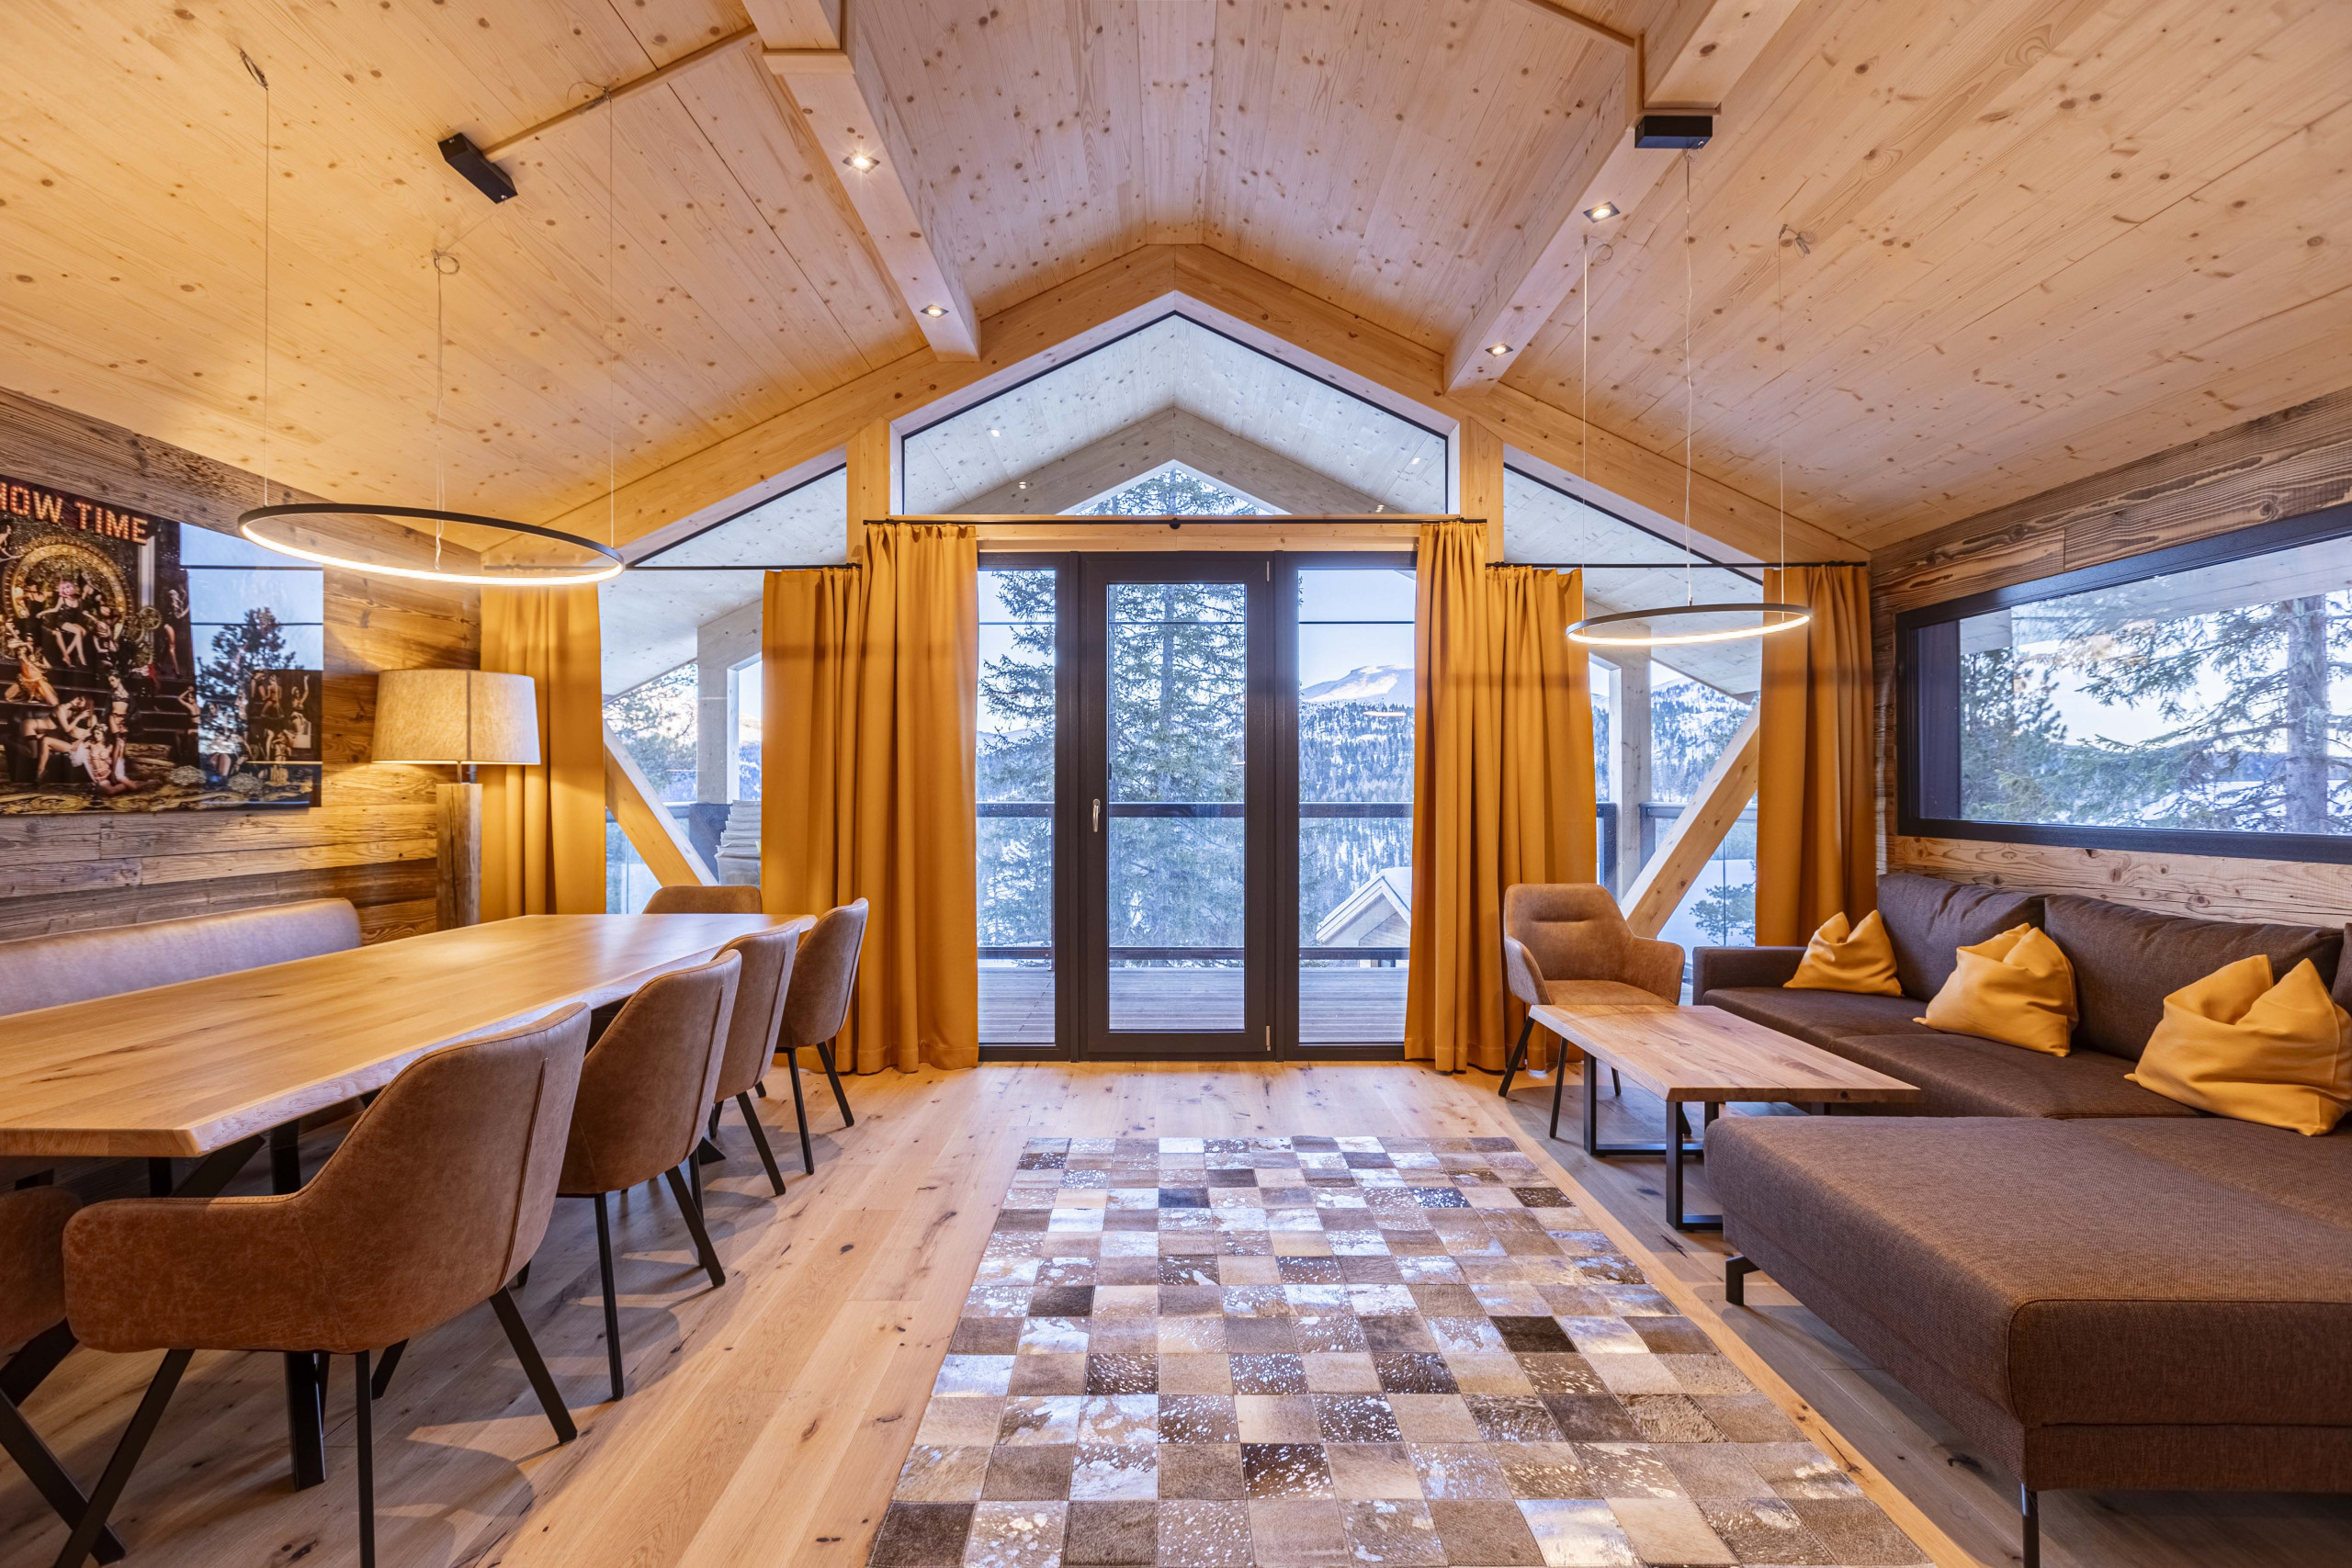  in Turrach - Superior Chalet # 4 with Sauna & Hot Tub